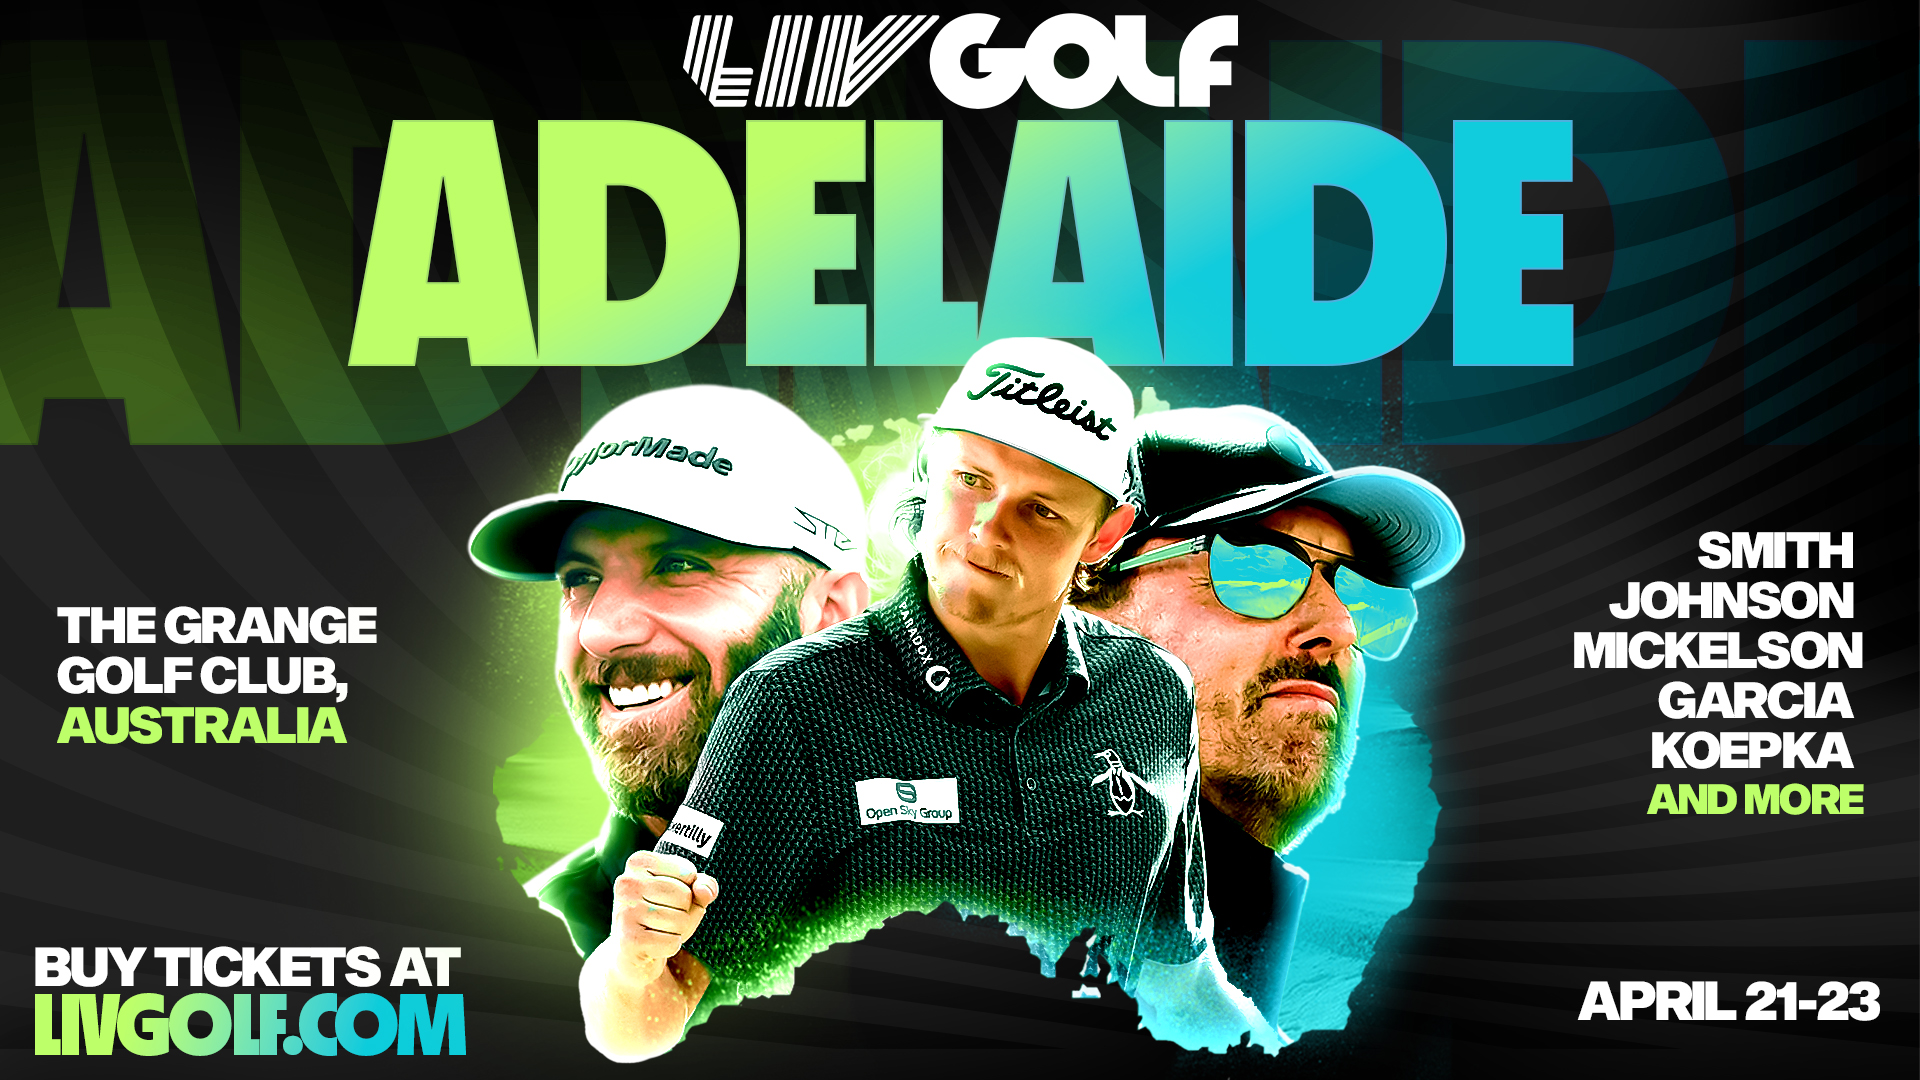 LIV Golf Adelaide releases additional tickets for highly anticipated